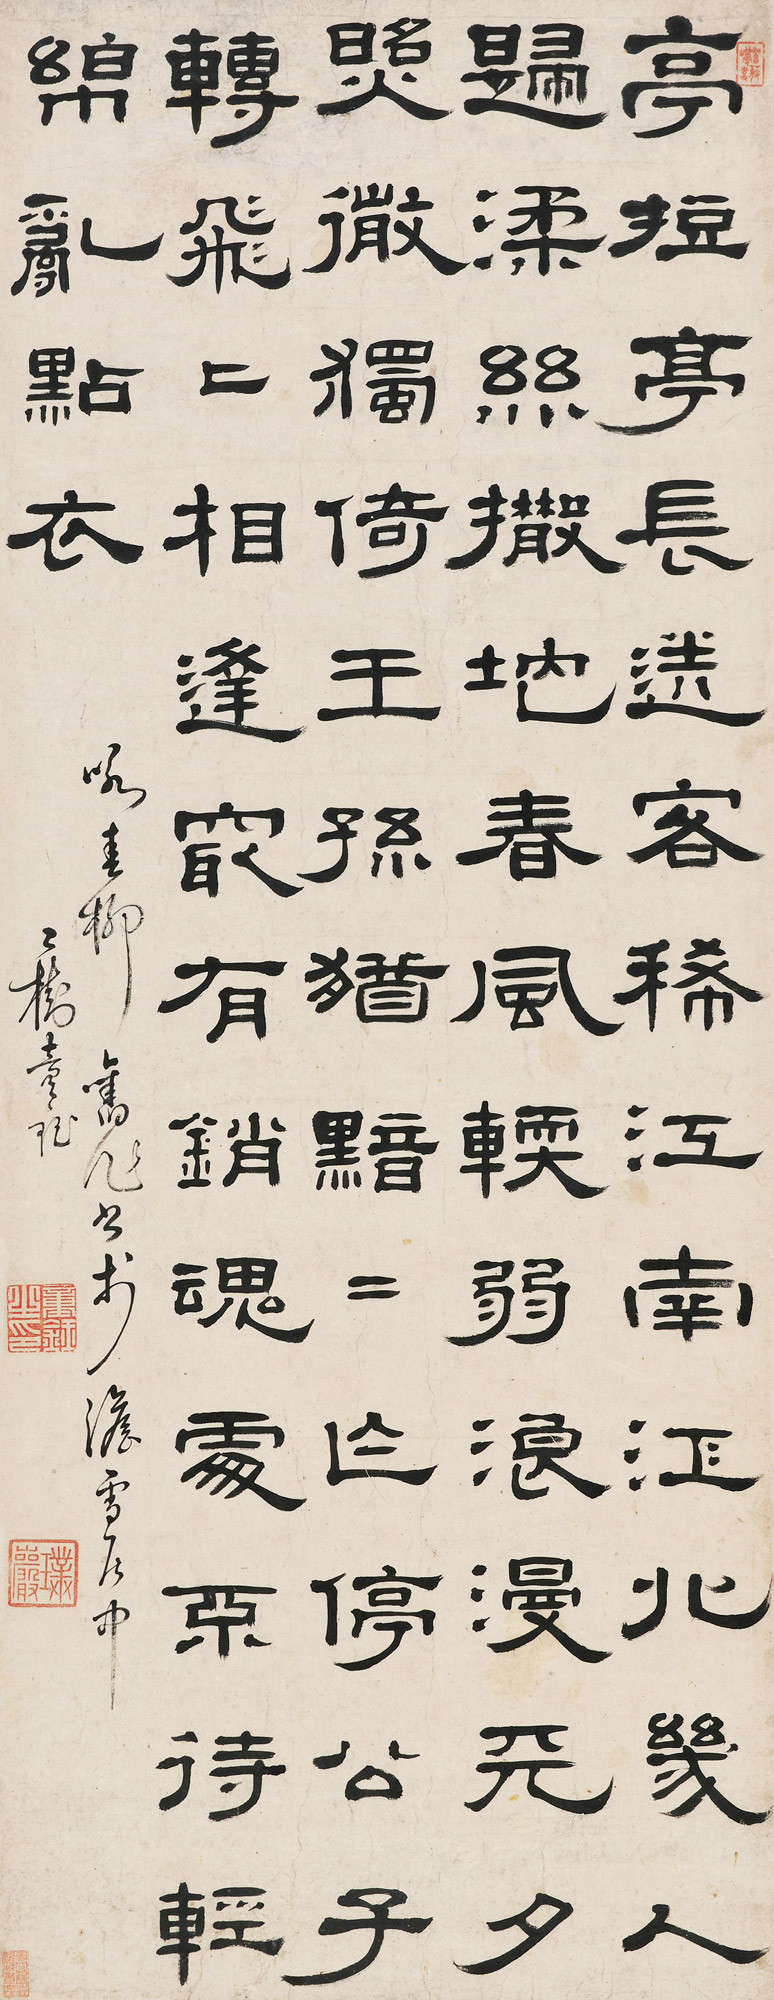 CALLIGRAPHY IN OFFICIAL SCRIPT